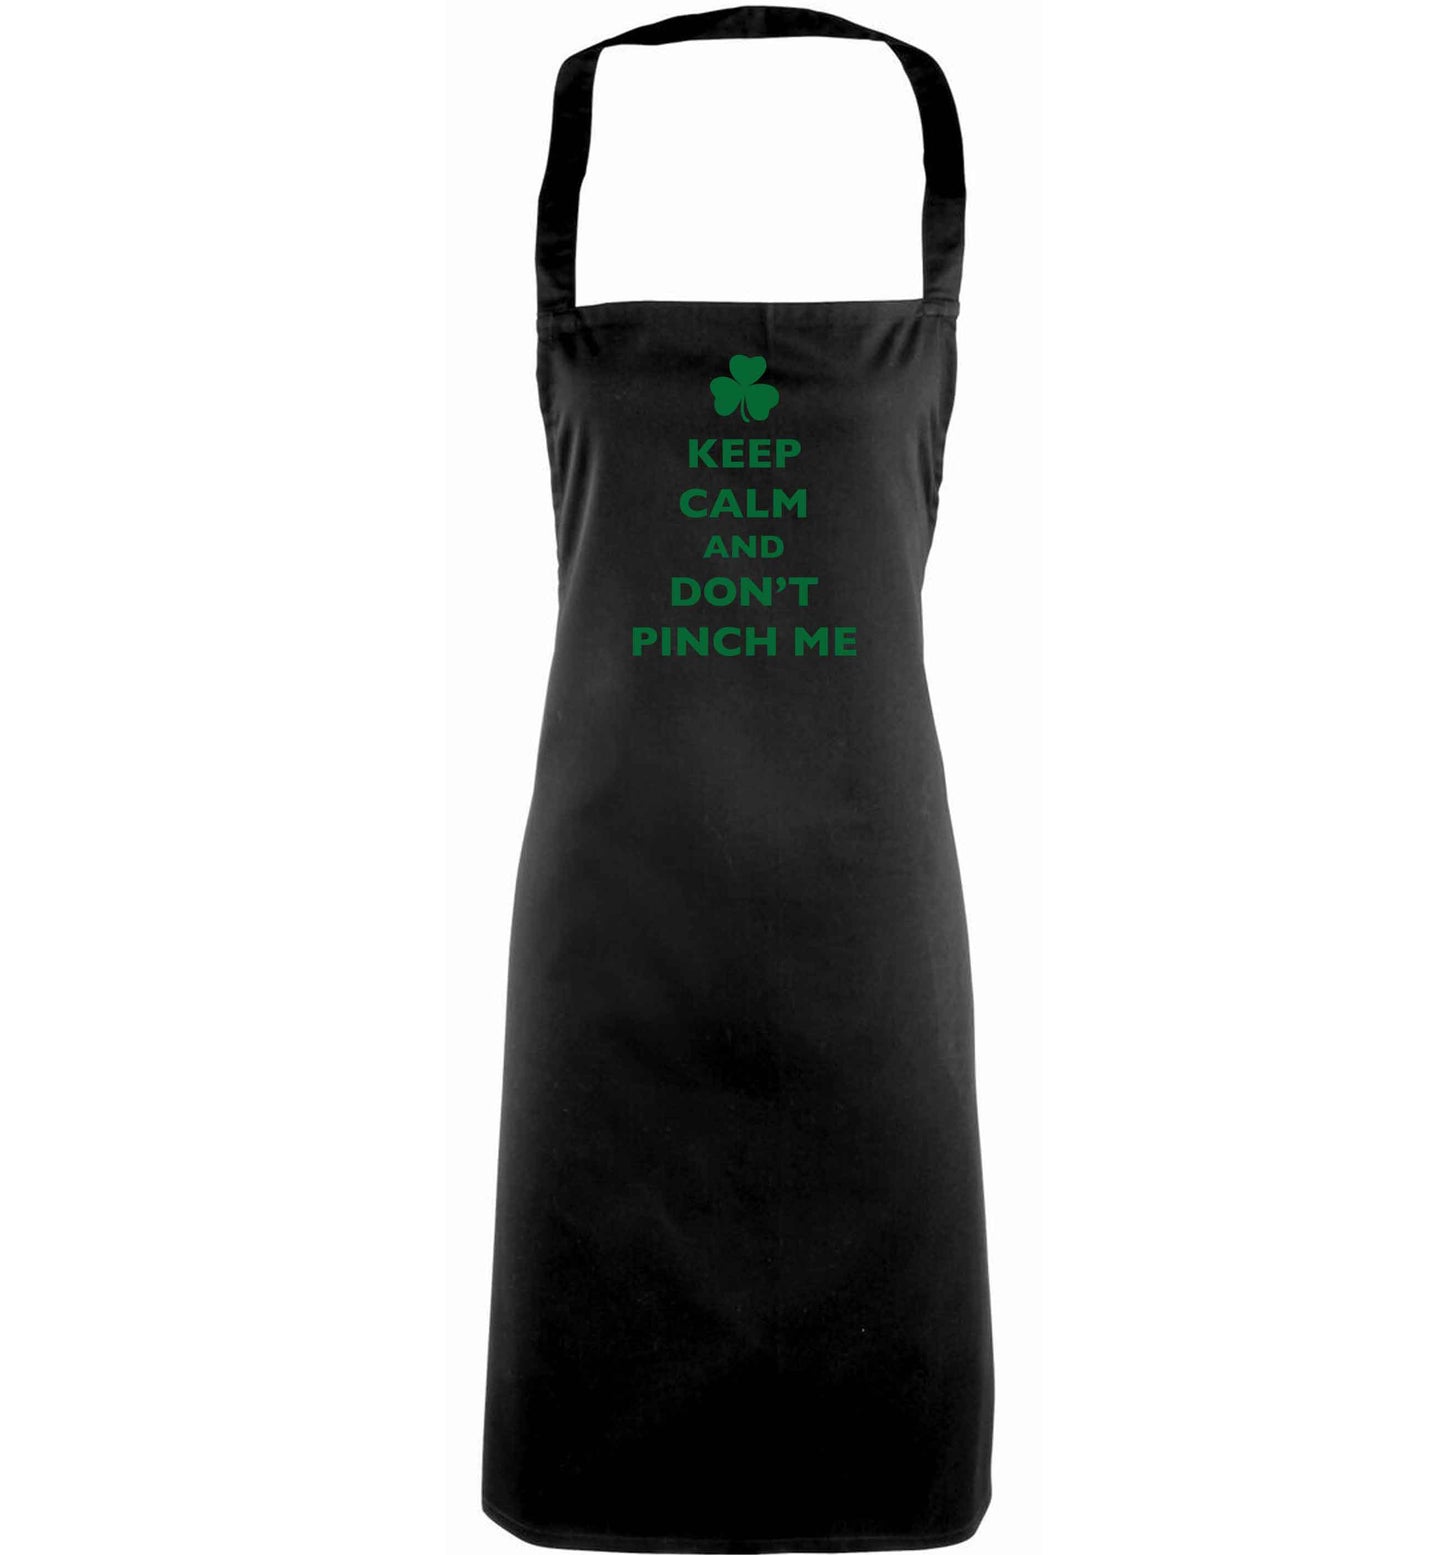 Keep calm and don't pinch me adults black apron